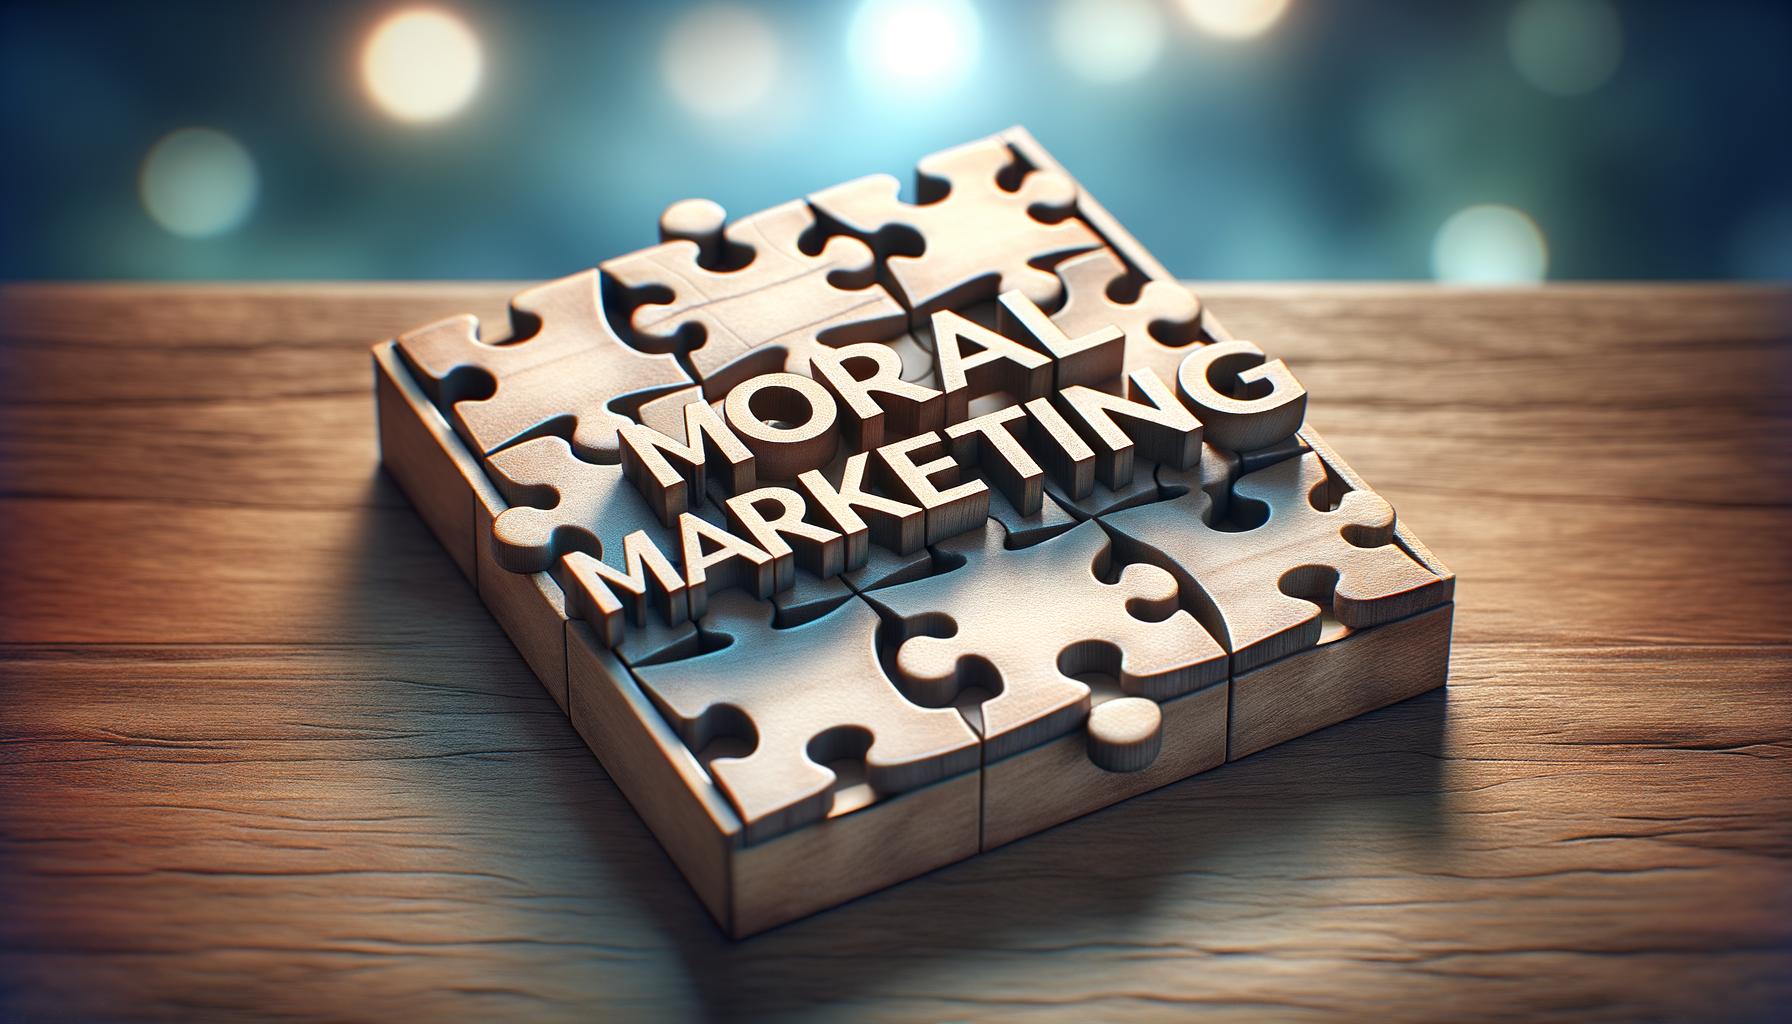 components of moral marketing